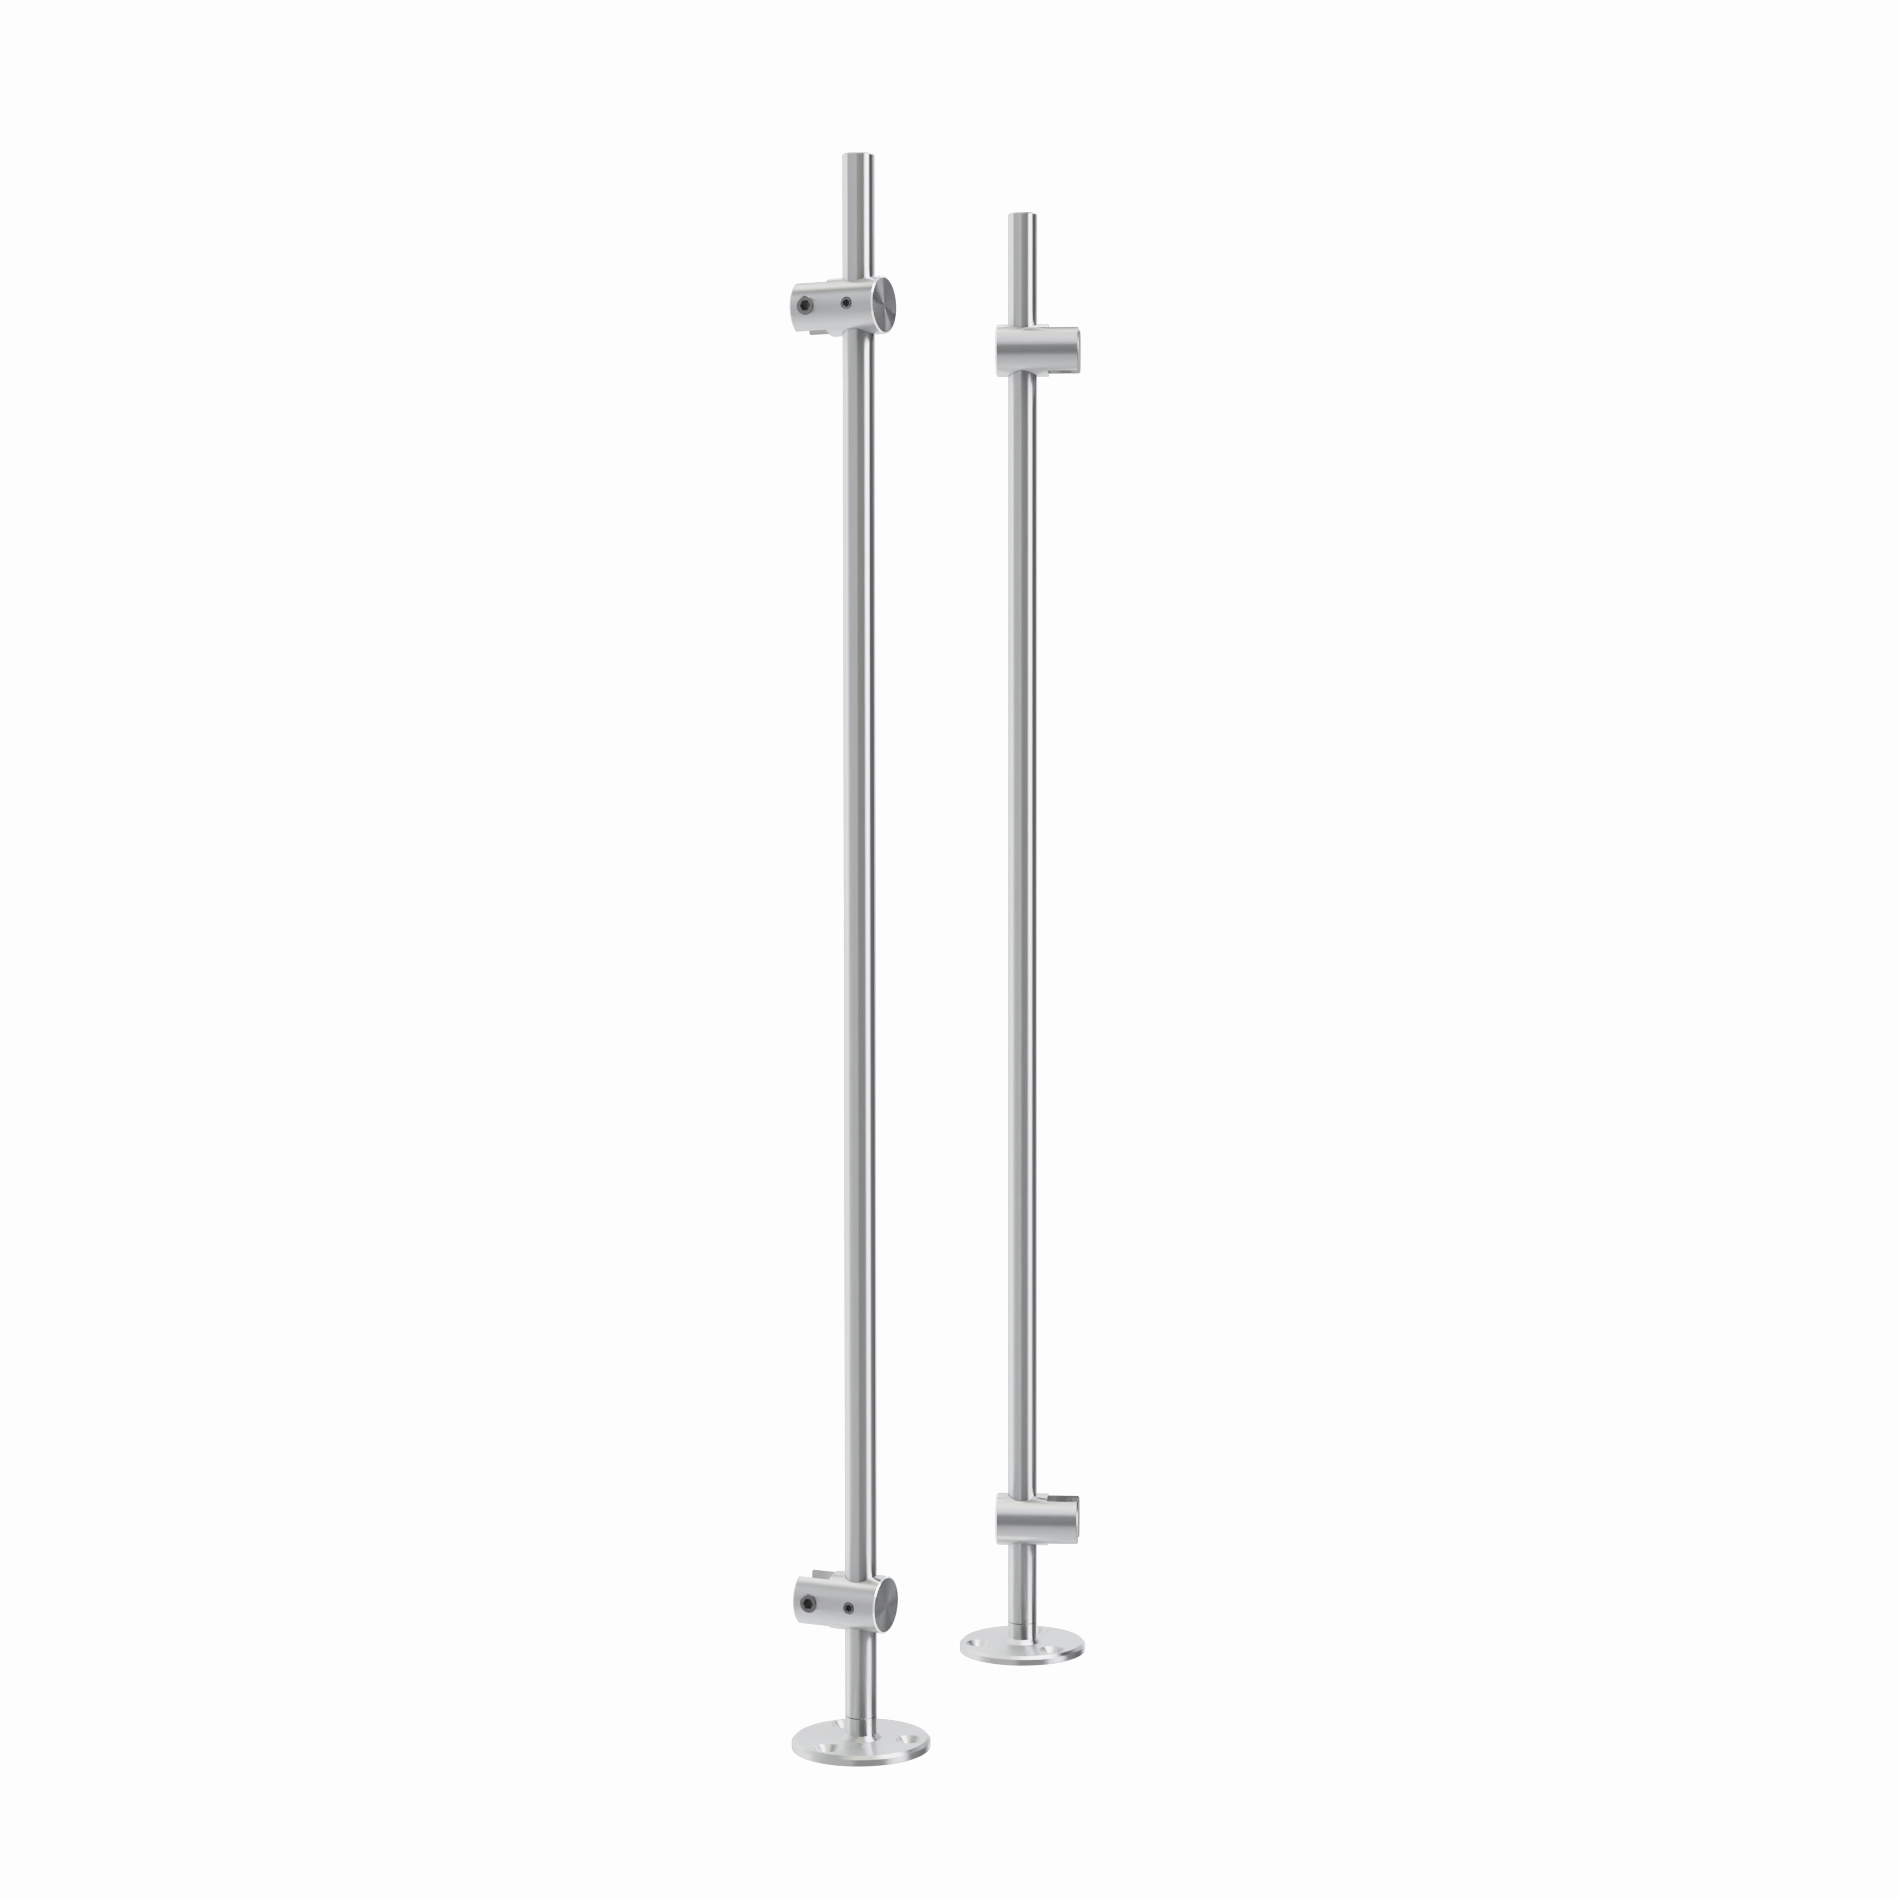 Set of 2, 3/8’’ Diameter Rod Projecting Mount, Aluminum Clear Anodized Finish, 20'' Long w/ 3 Holes Mounting Plate, to be installed with screws (Included) or double sided tape (not included). Hold up to 5/16'' material thickness.